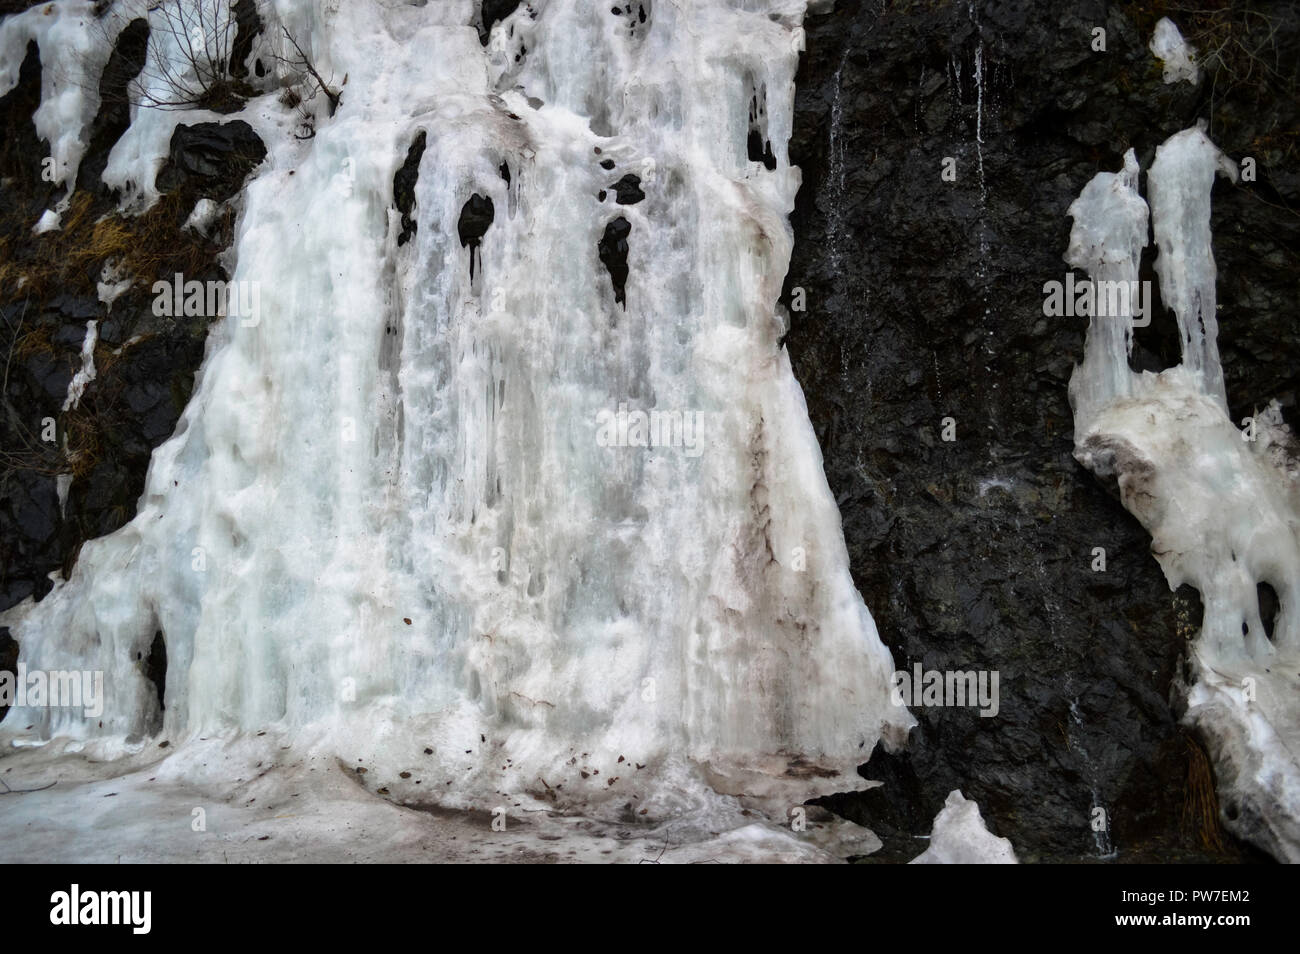 Frozen ice during winter on the side of a mountain. Stock Photo